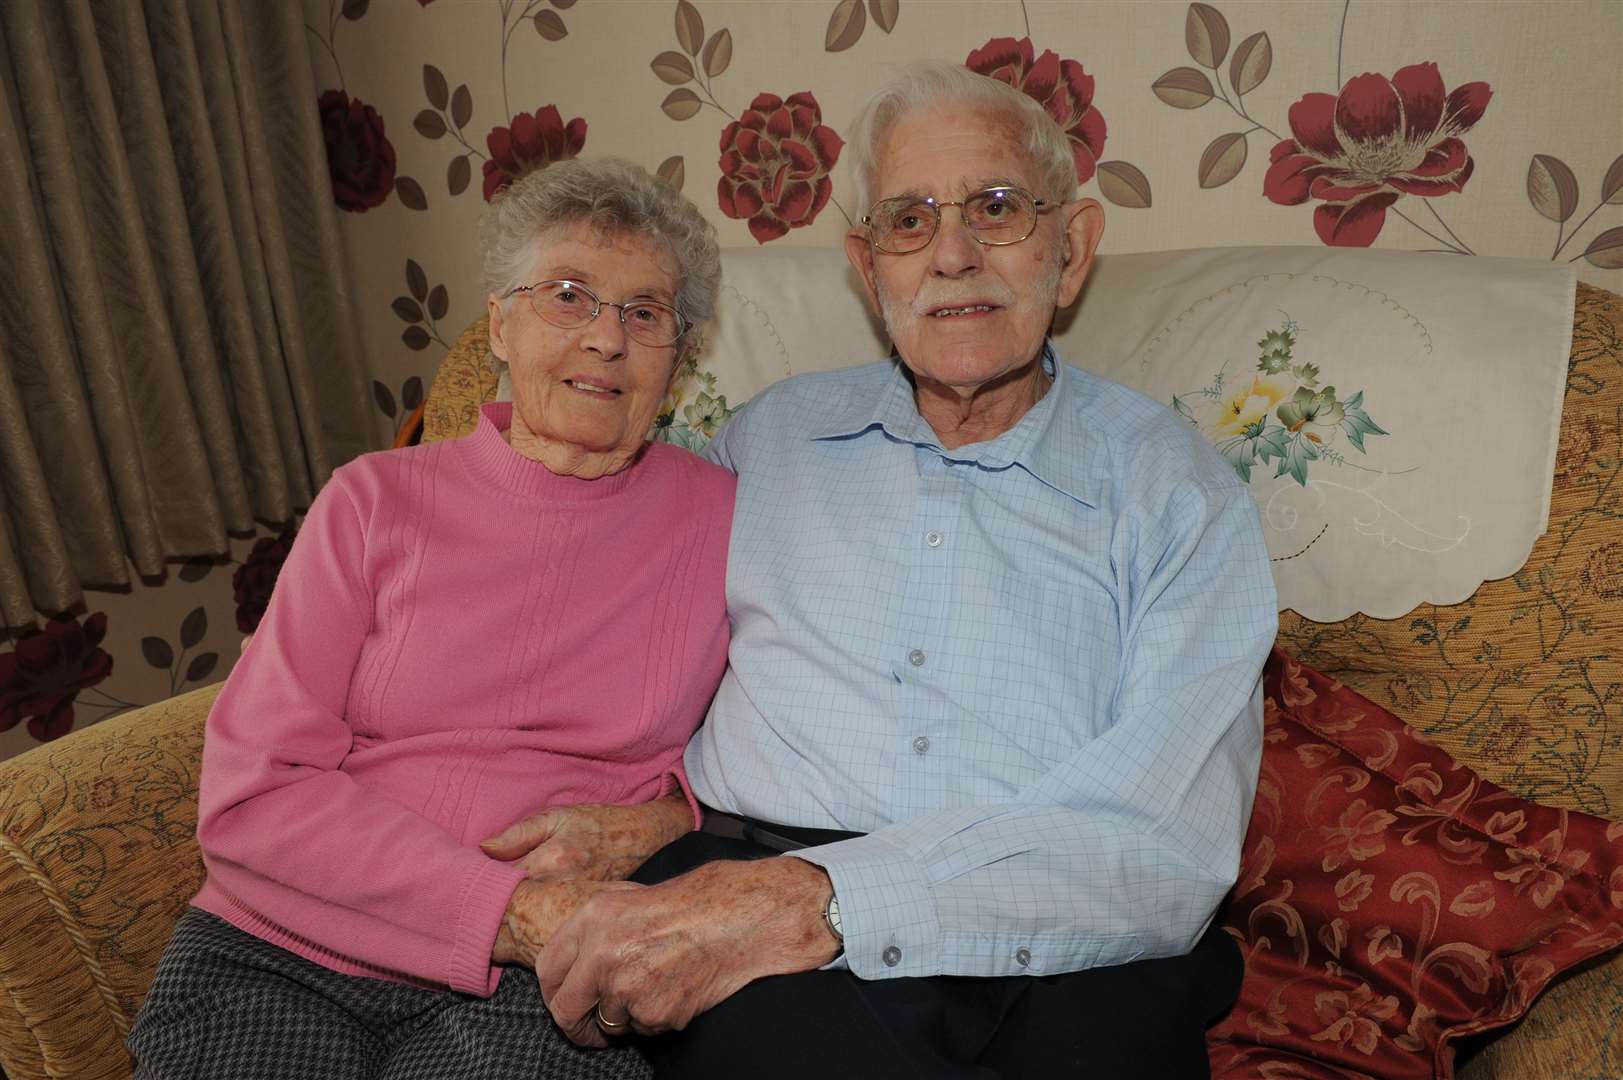 Frank and Frances KIng celebrate their 70th wedding anniversary.